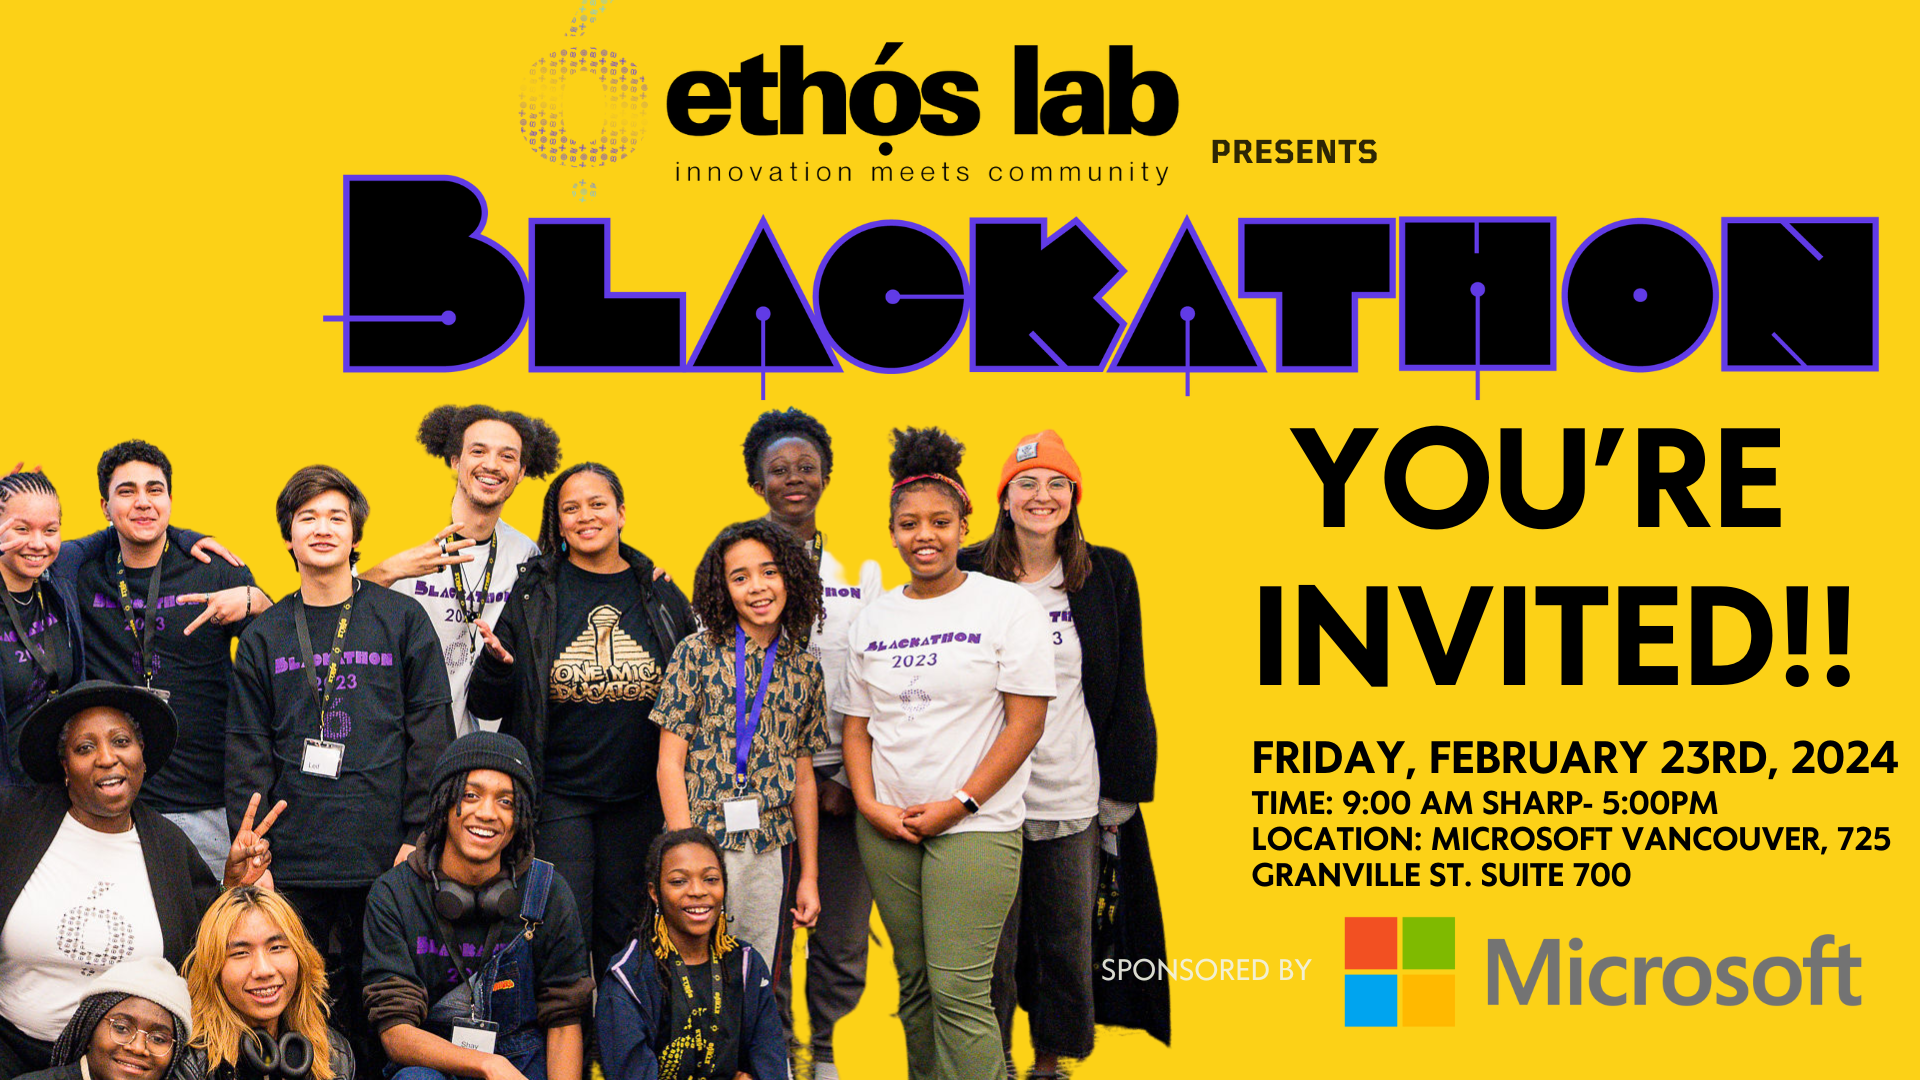 Diverse teens on the left with caption of Black-a-thon on the right with "Black-a-thon" on the top heading.